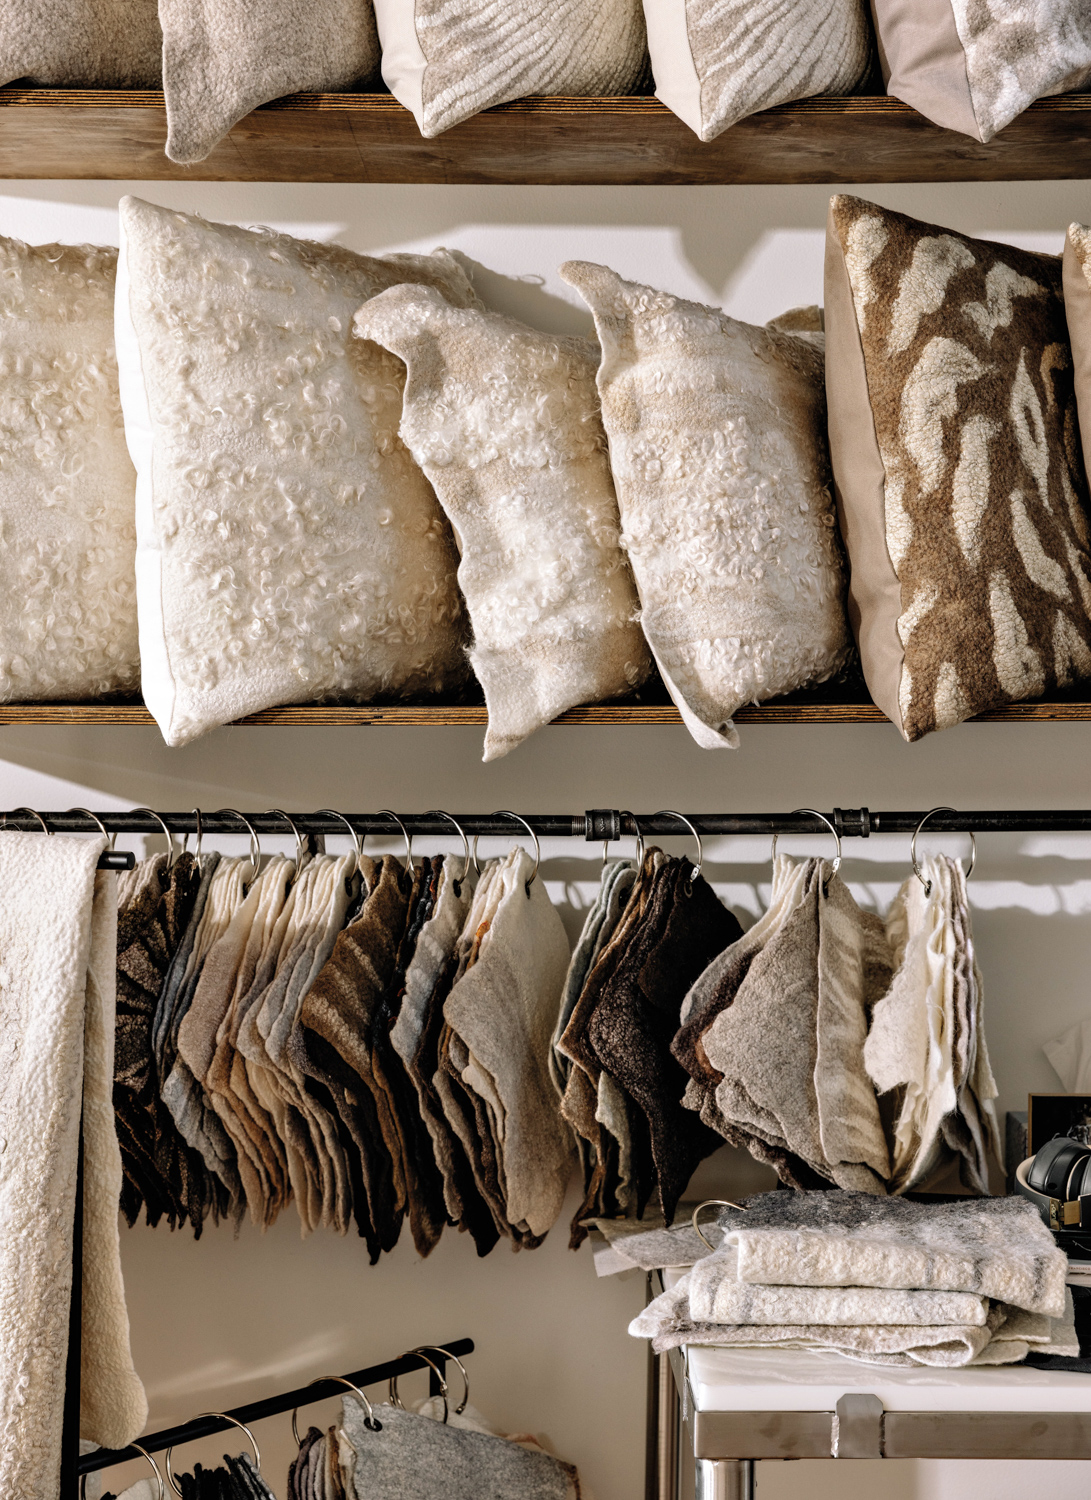 Decorative pillows and pieces of fabric hanging on a shelf